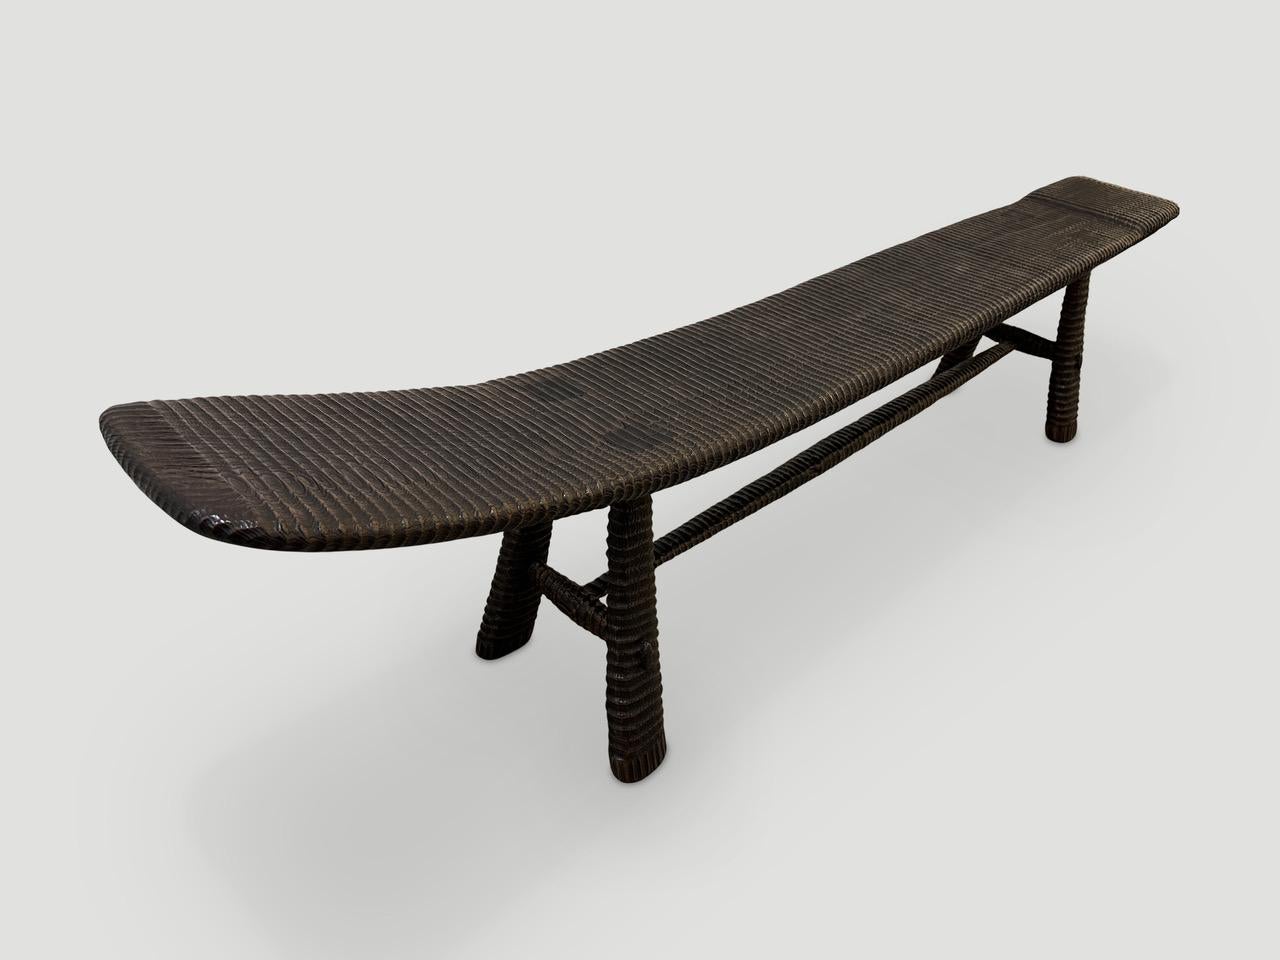 Andrianna Shamaris Impressive Hand Carved Espresso Stained Teak Bench or Chaise In Excellent Condition For Sale In New York, NY